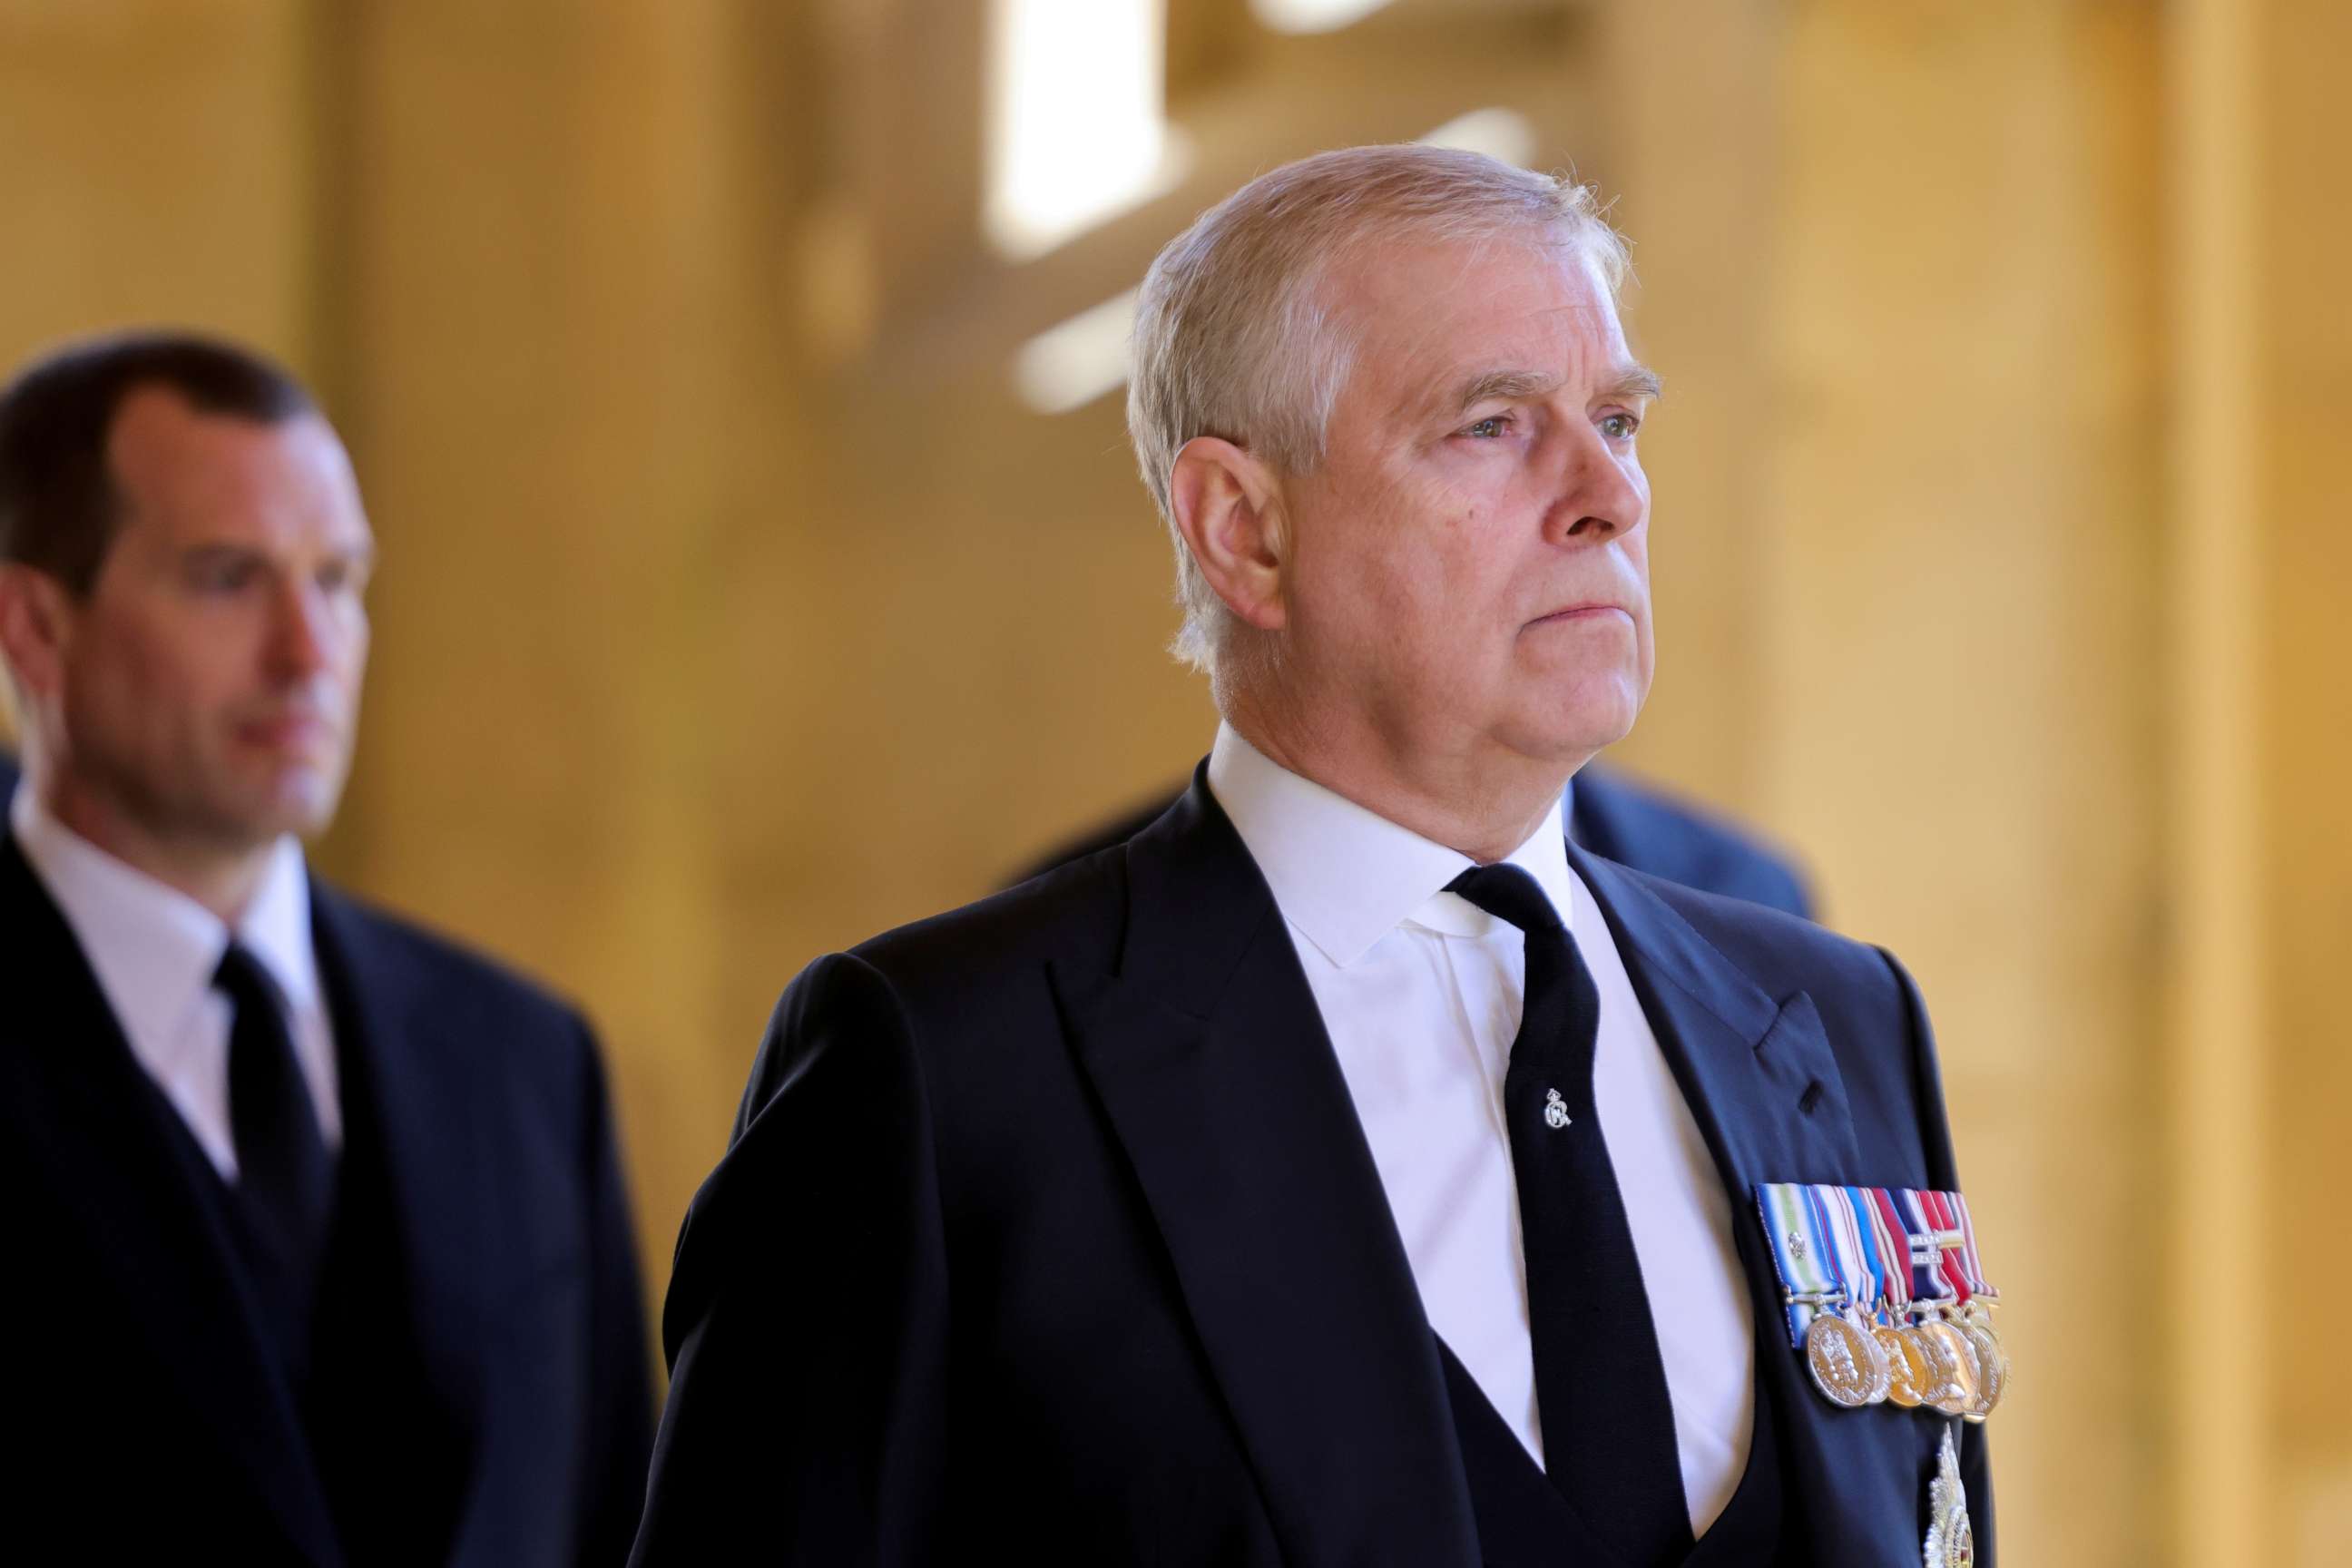 FILE PHOTO: Britain's Britain's Prince Andrew, Duke of York, looks on during the funeral of Britain's Prince Philip, husband of Queen Elizabeth, who died at the age of 99, on the grounds of Windsor Castle in Windsor, Britain, April 17, 2021.